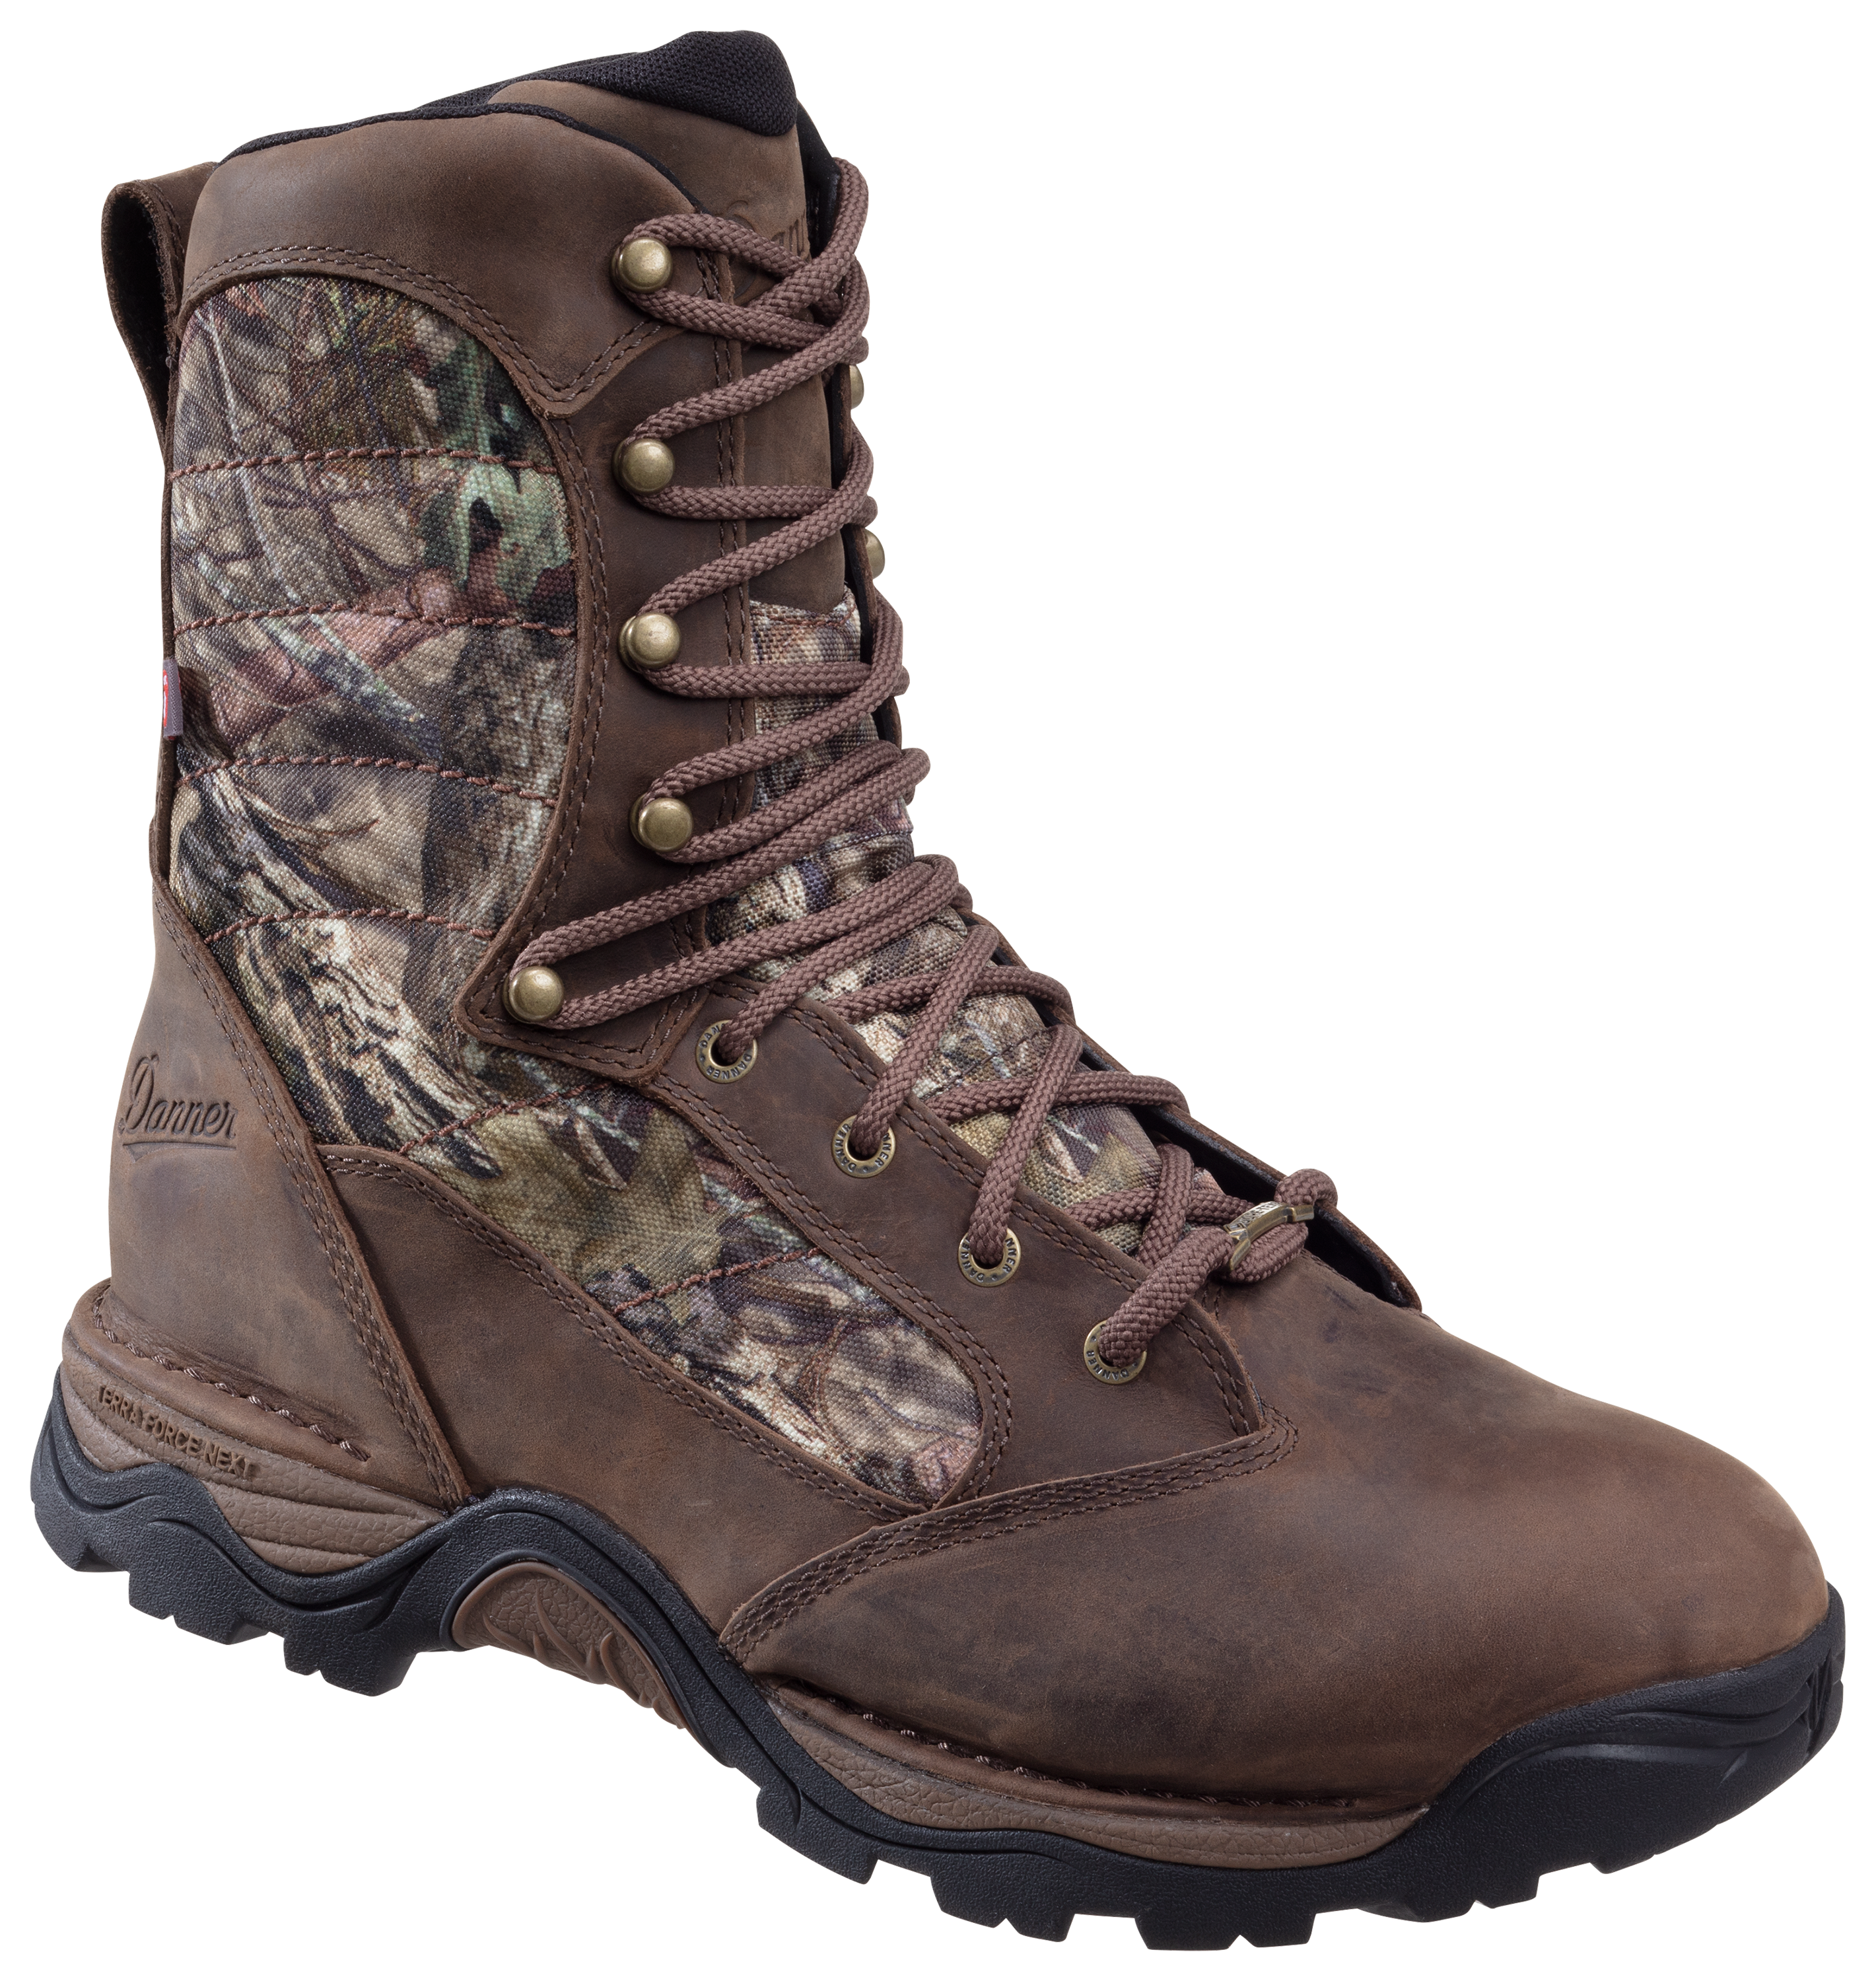 Danner Pronghorn 800 Insulated GORE-TEX Hunting Boots for Men - Mossy Oak Break-Up Country - 14M